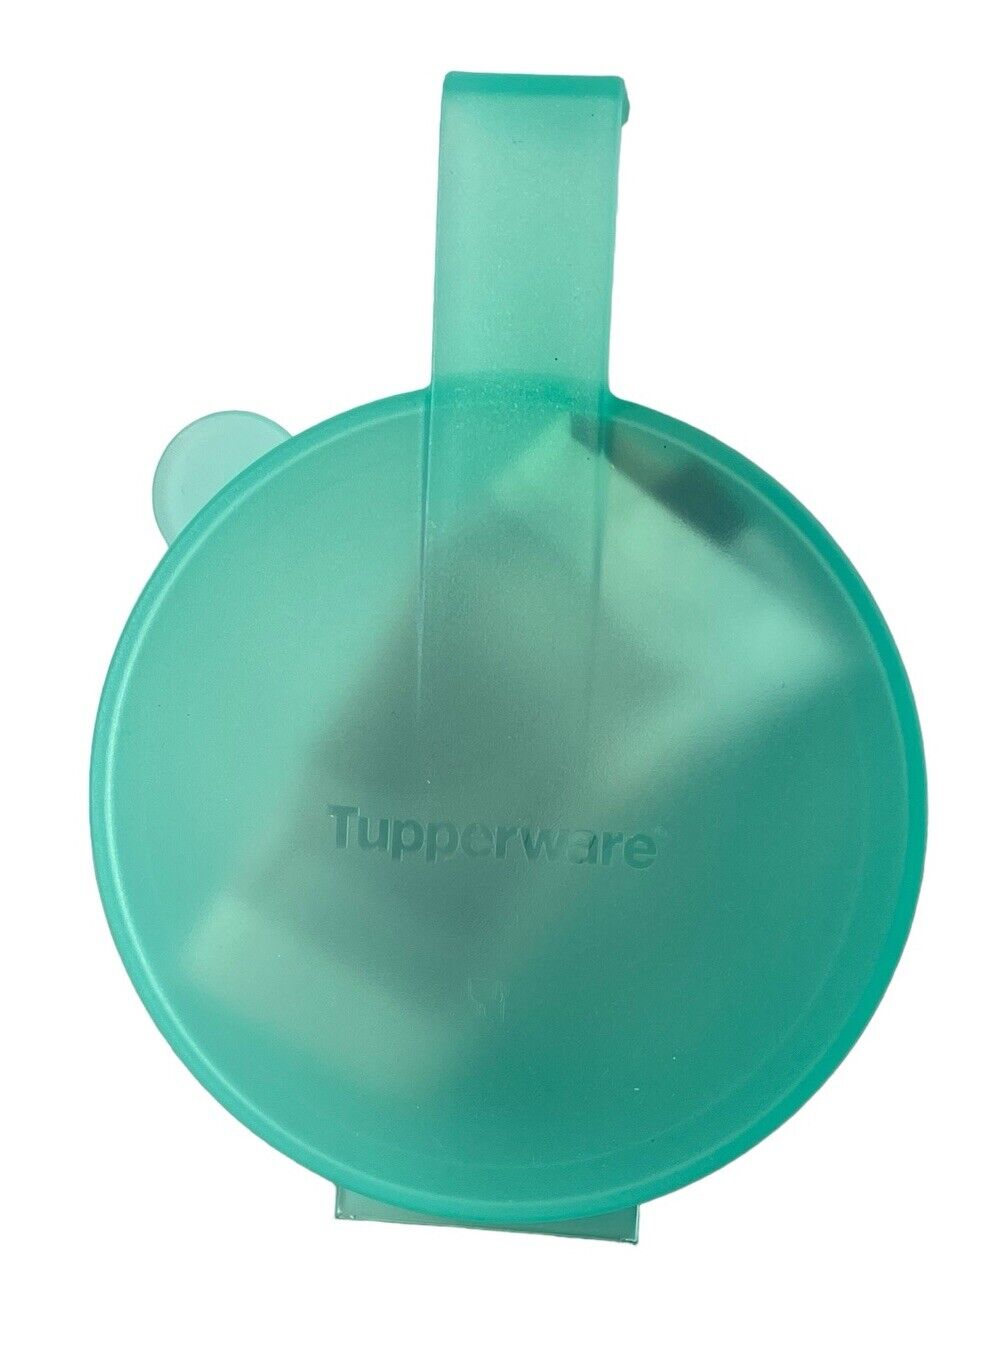 New Tupperware Forget-me-not Keeper Teal Colored Onion Tomato Fruit Vegetable